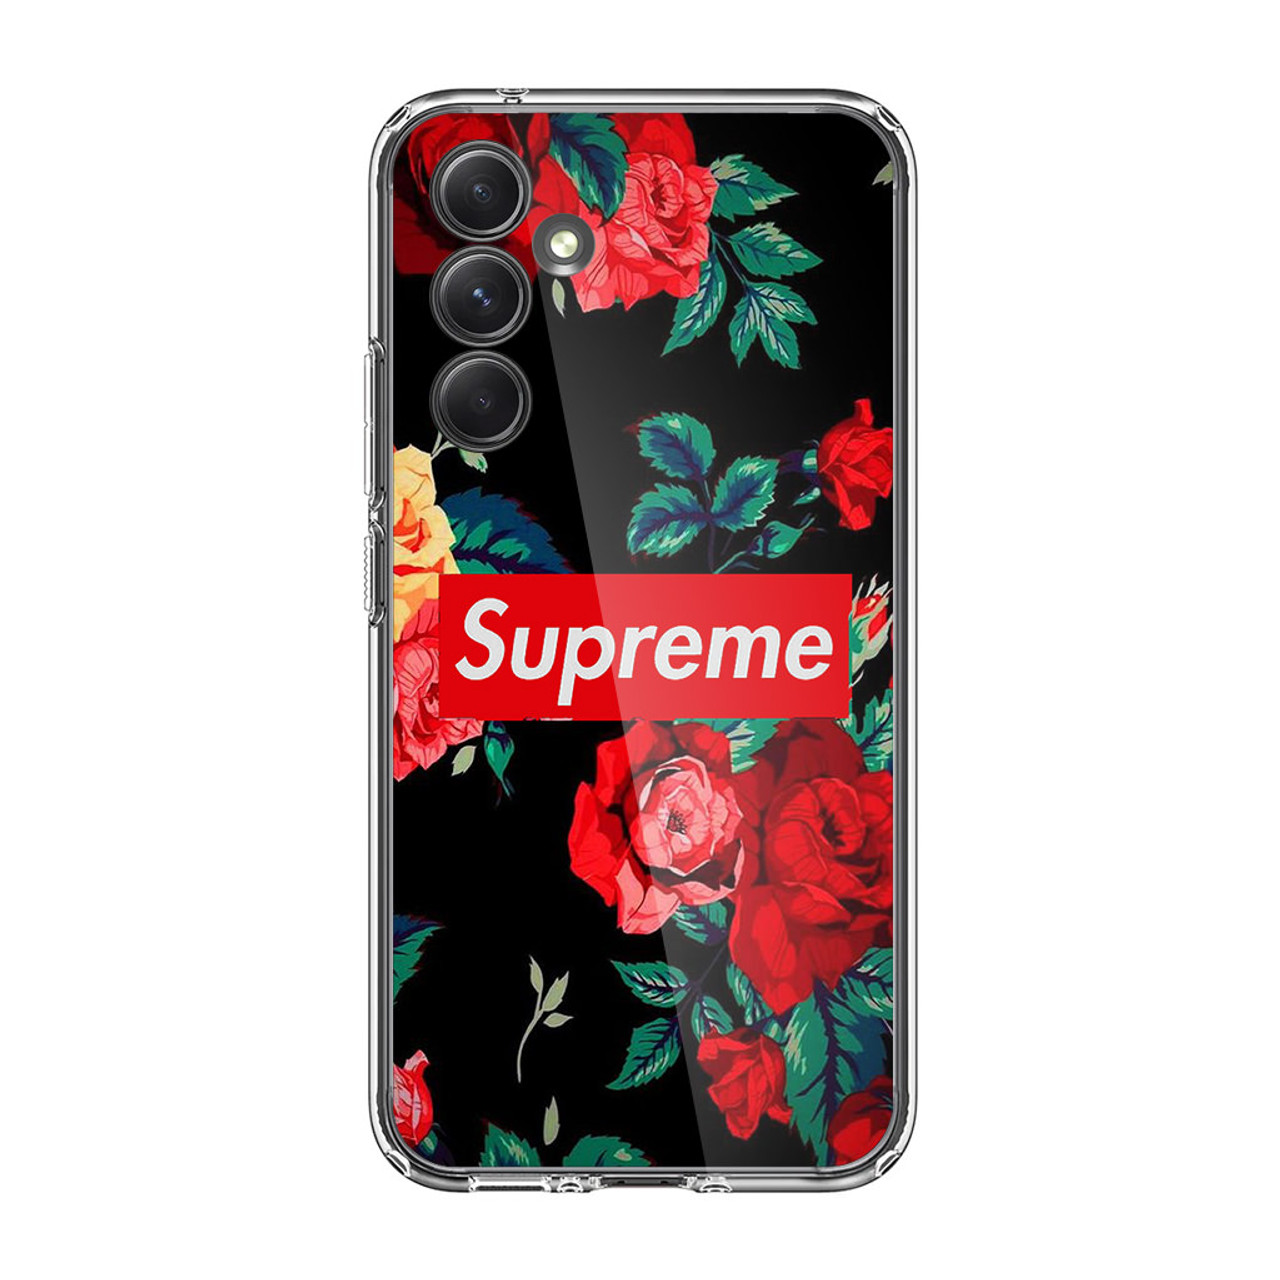 Supreme Red Cell Phone Cases